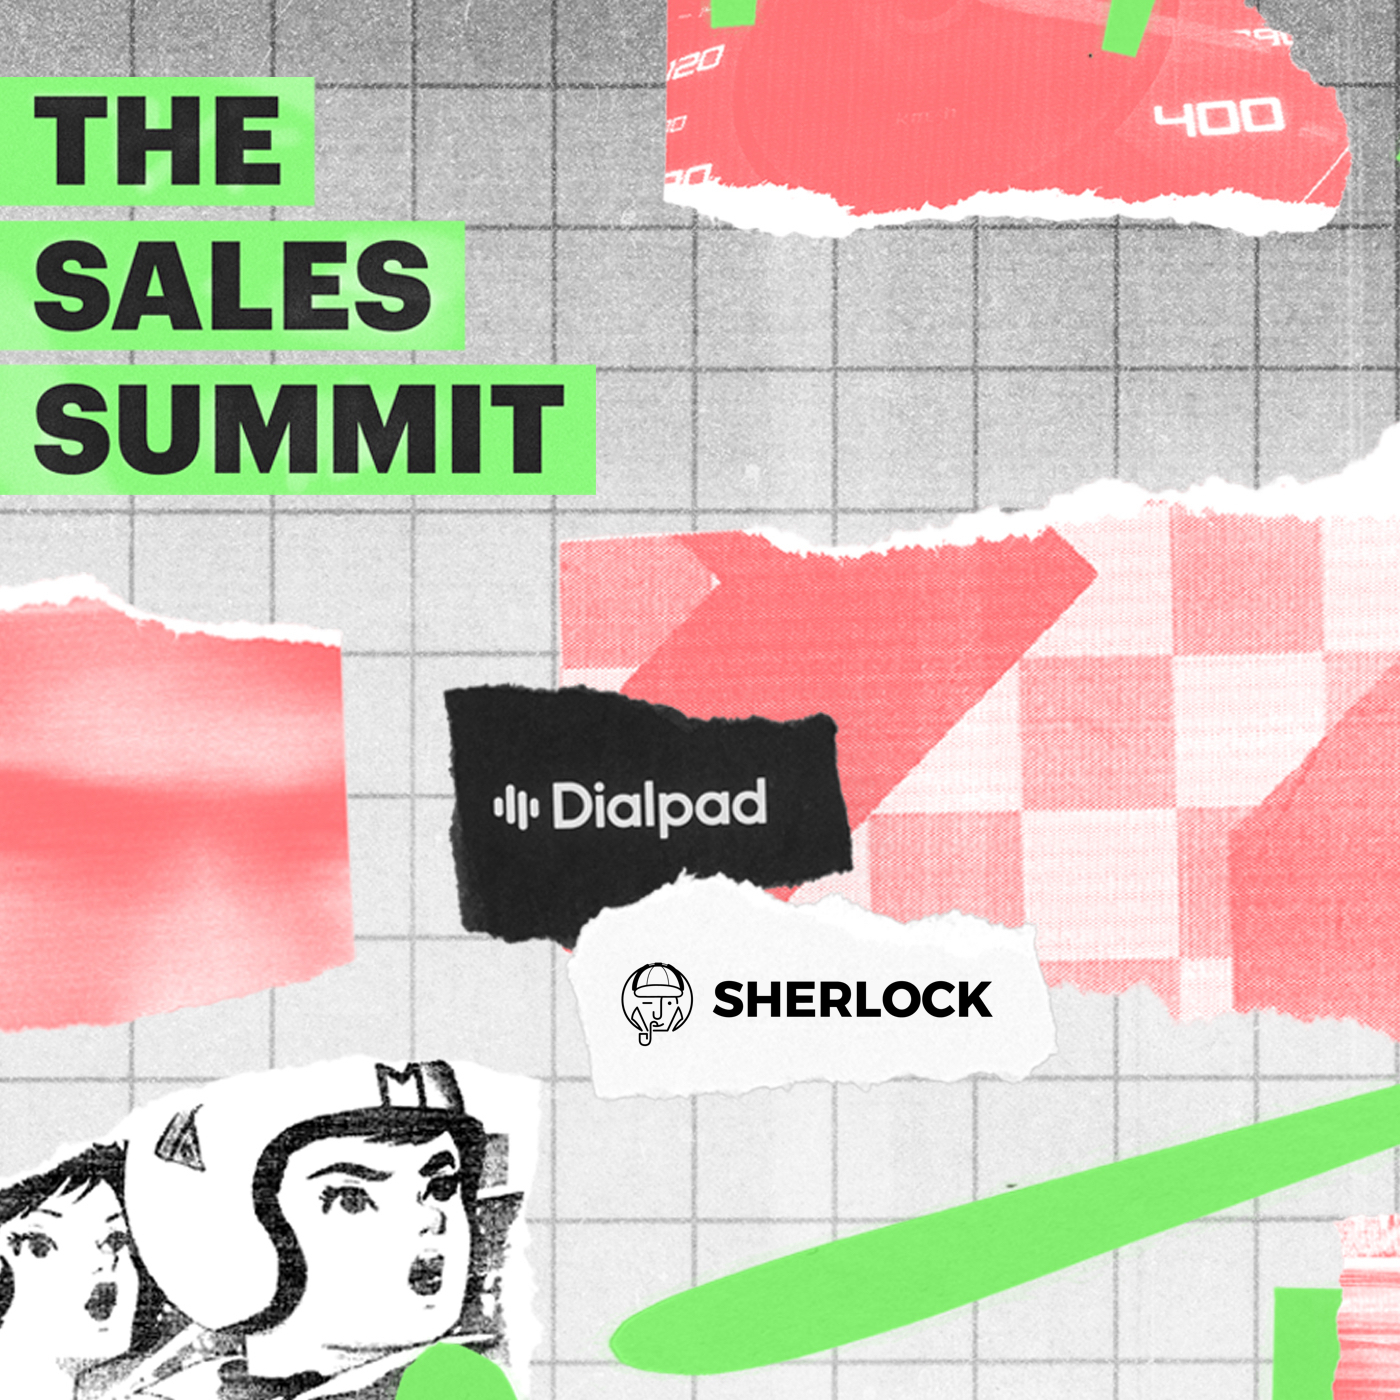 The Sales Summit: The need for speed